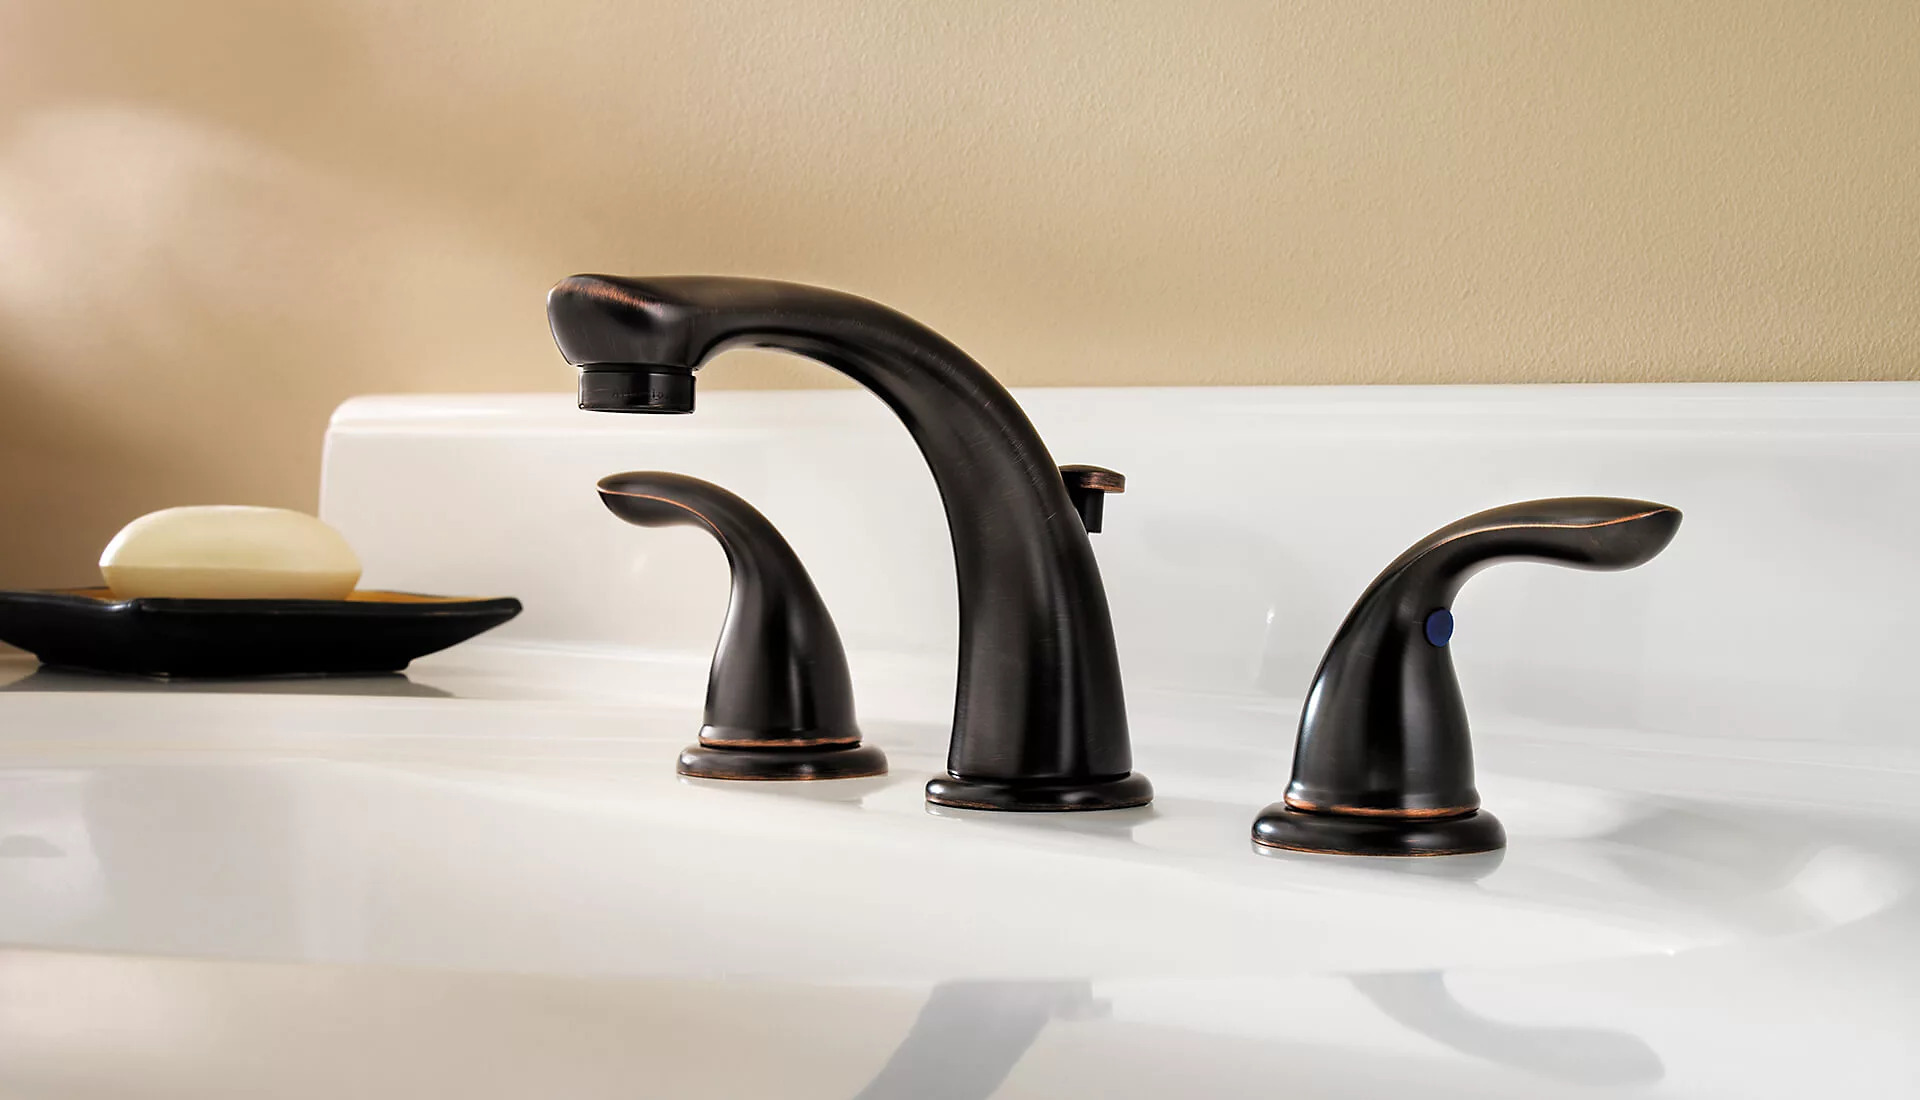 13 Best Price Pfister Bathroom Faucet for 2023